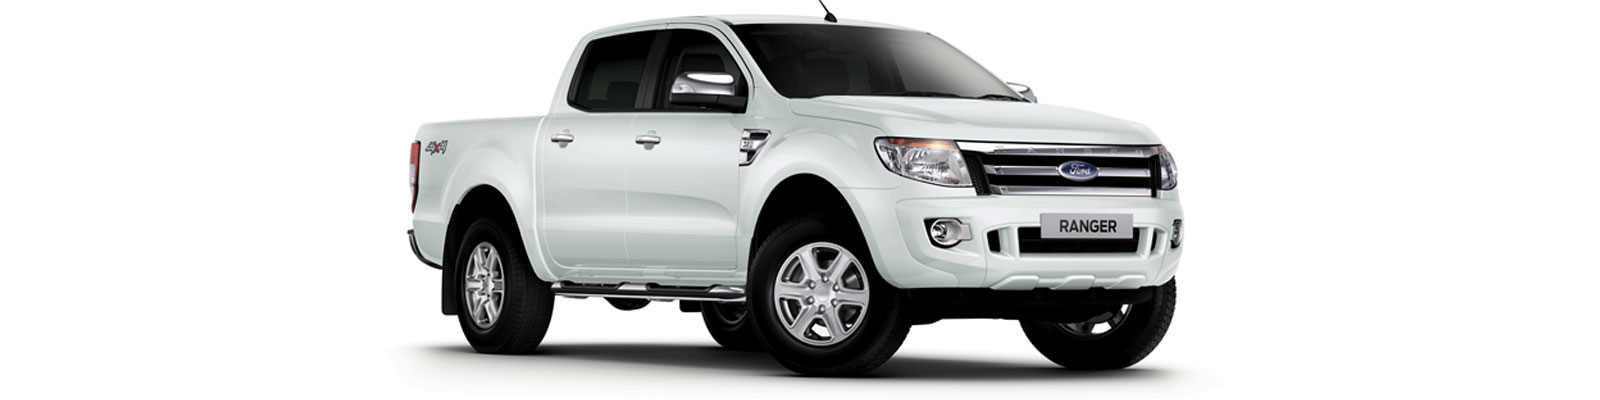 Accessories For The Ford Ranger Double Cab 2012-2016